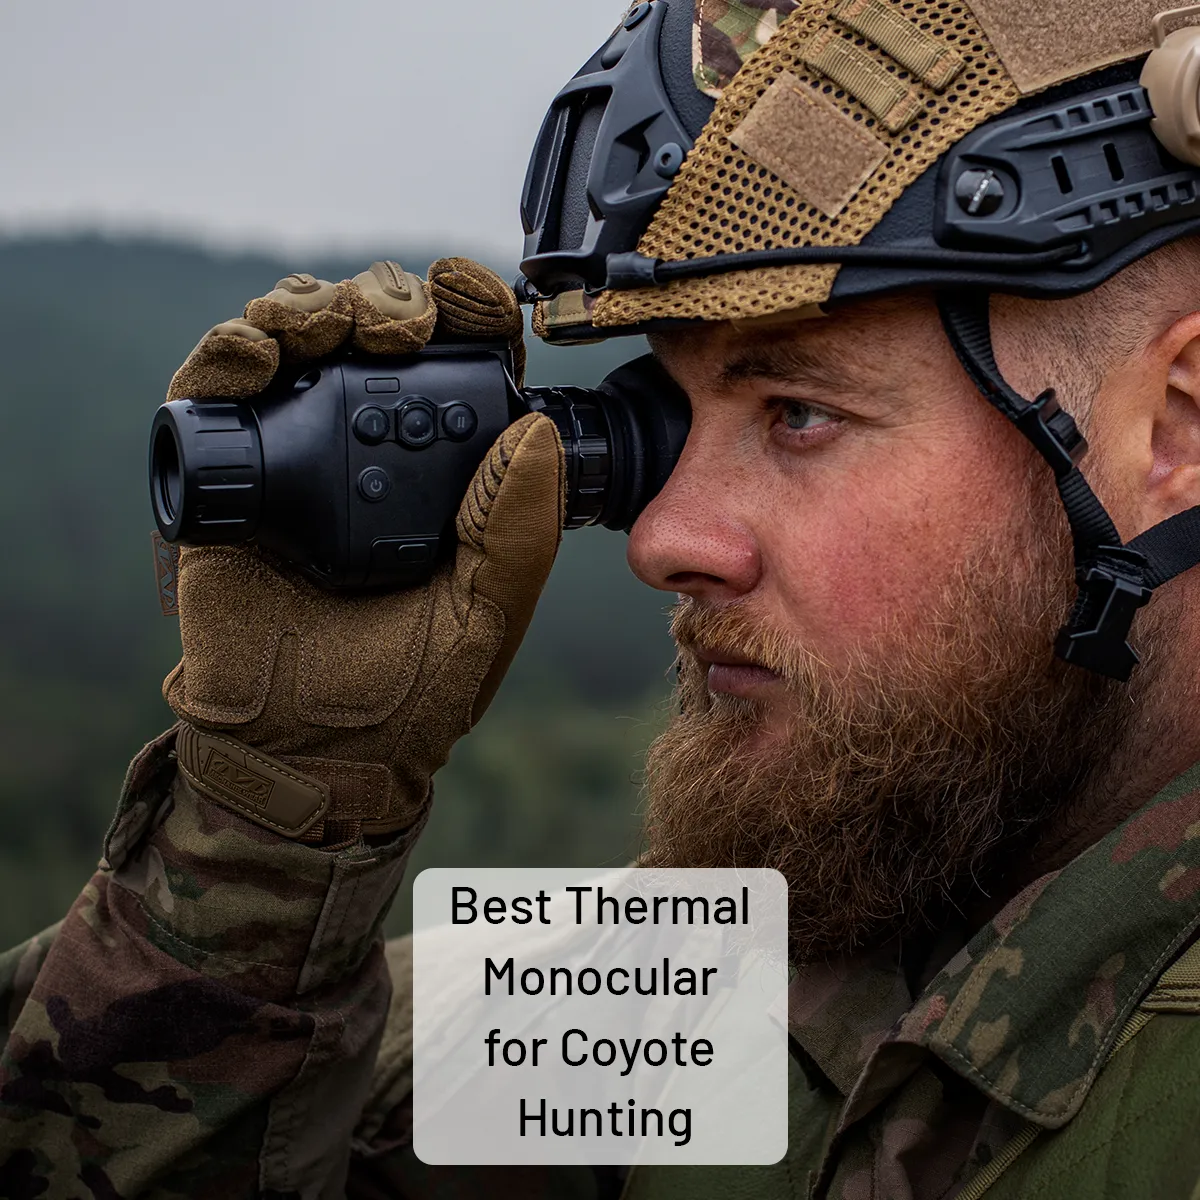  Best Thermal Monocular for Coyote Hunting